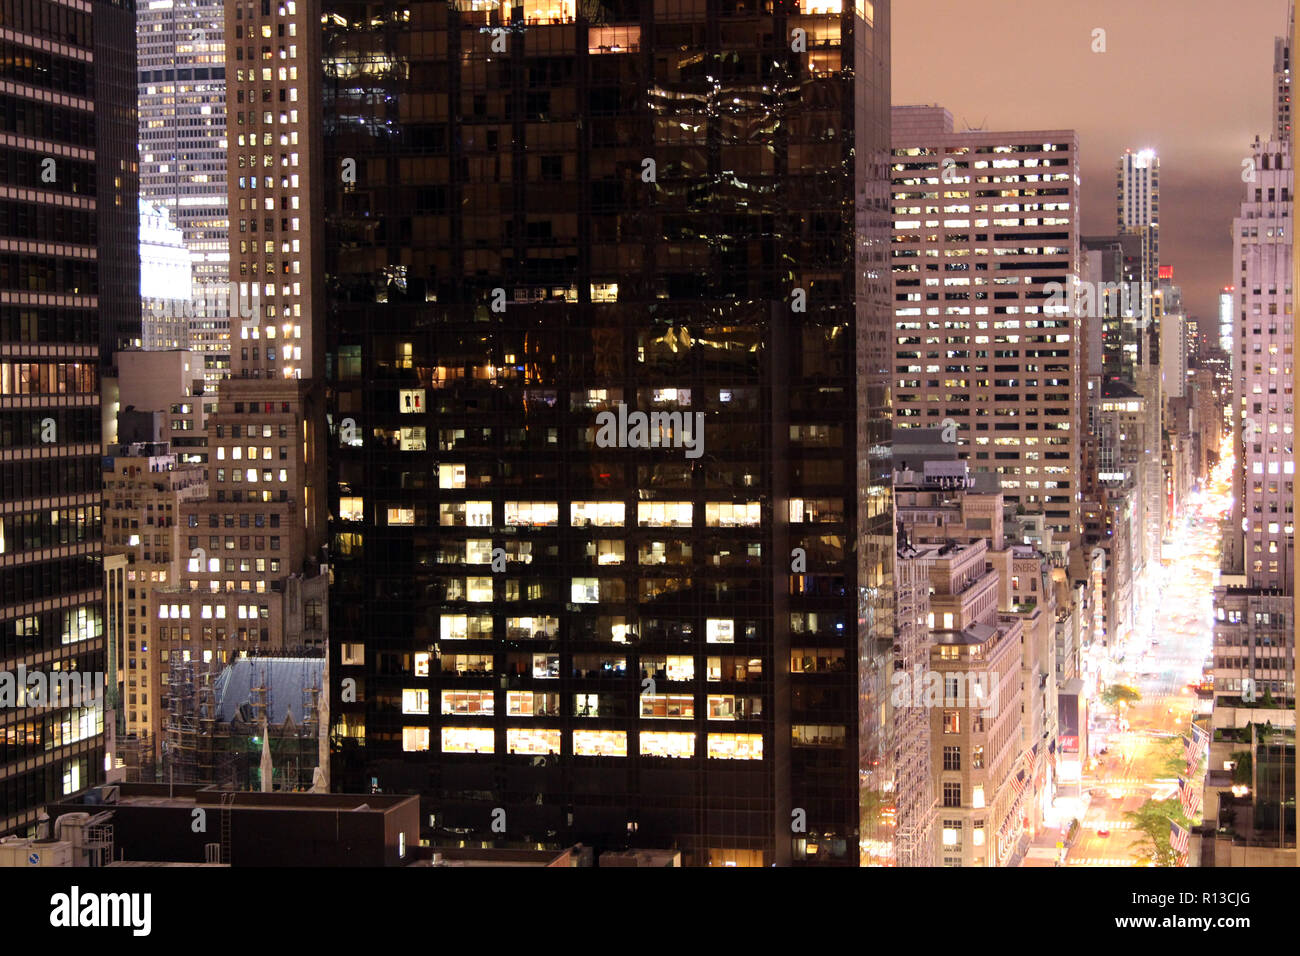 Seventh Avenue at night, as seen from the top of Hotel Pennsylvania (Salon de Ning), New York, NY Stock Photo